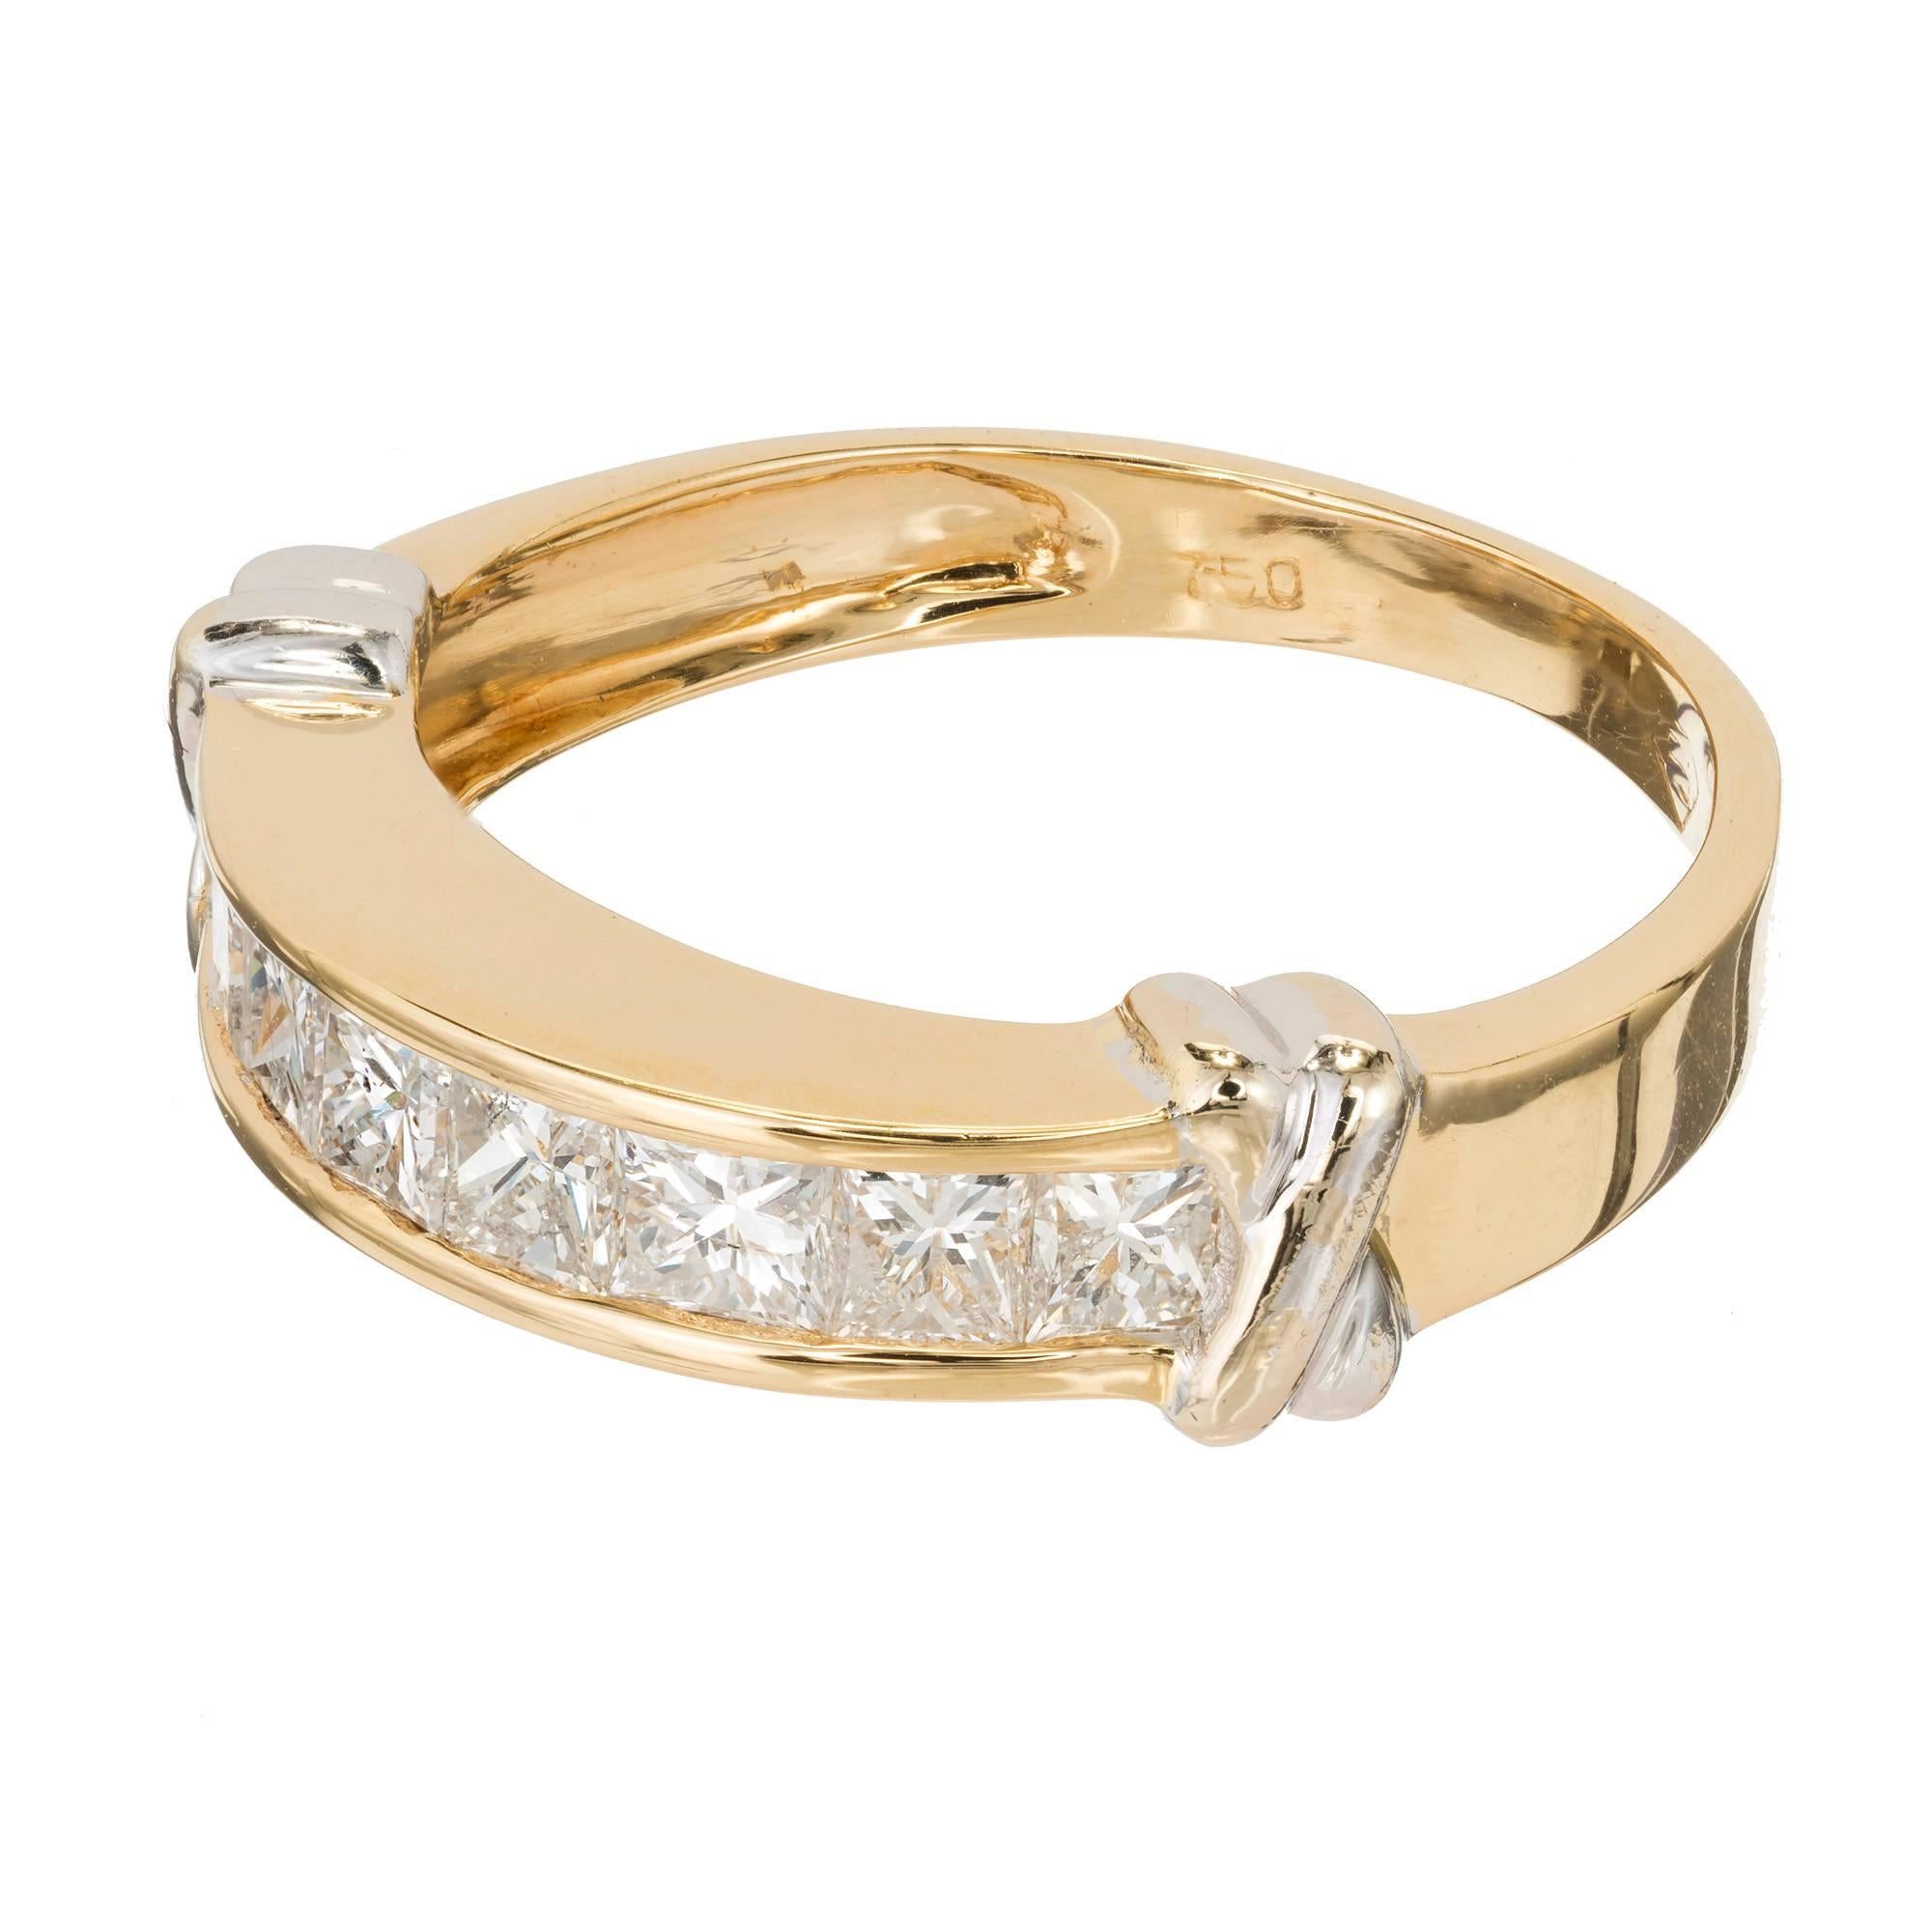 Vintage 1980s channel set Princess cut Diamond 18k yellow gold wedding band with white gold “X” details.

18k yellow gold
8 Princess cut Diamonds, approx. total weight .80cts, G – H, SI1
Tested: 18k
Stamped: 750
Hallmark: M
Width at top: